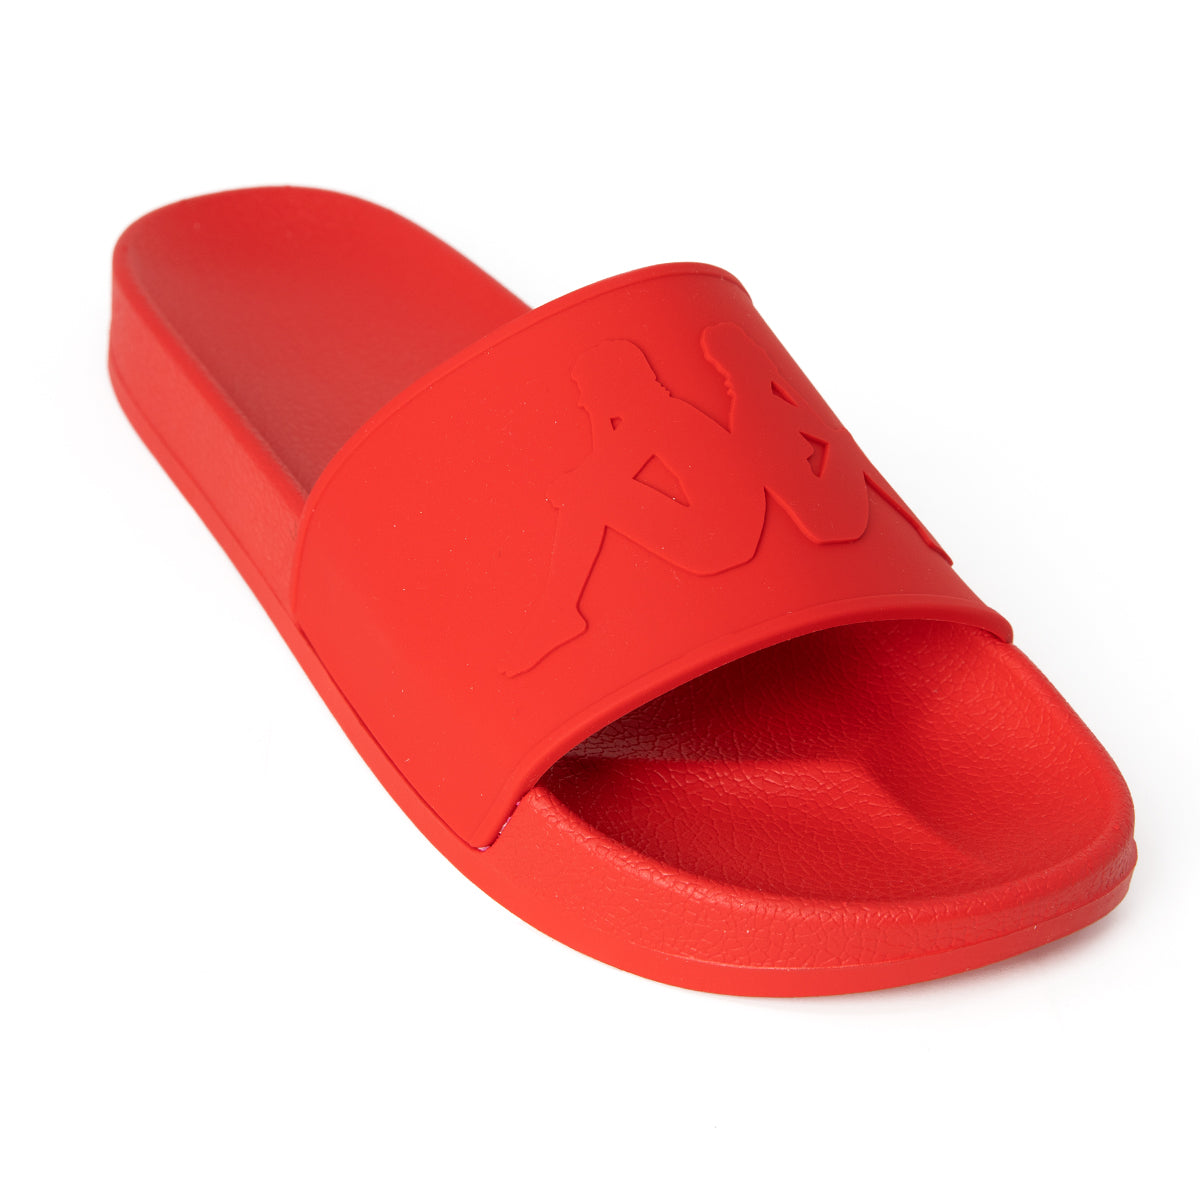 Kappa Authentic Caius 2 Slides - Red MD Coral